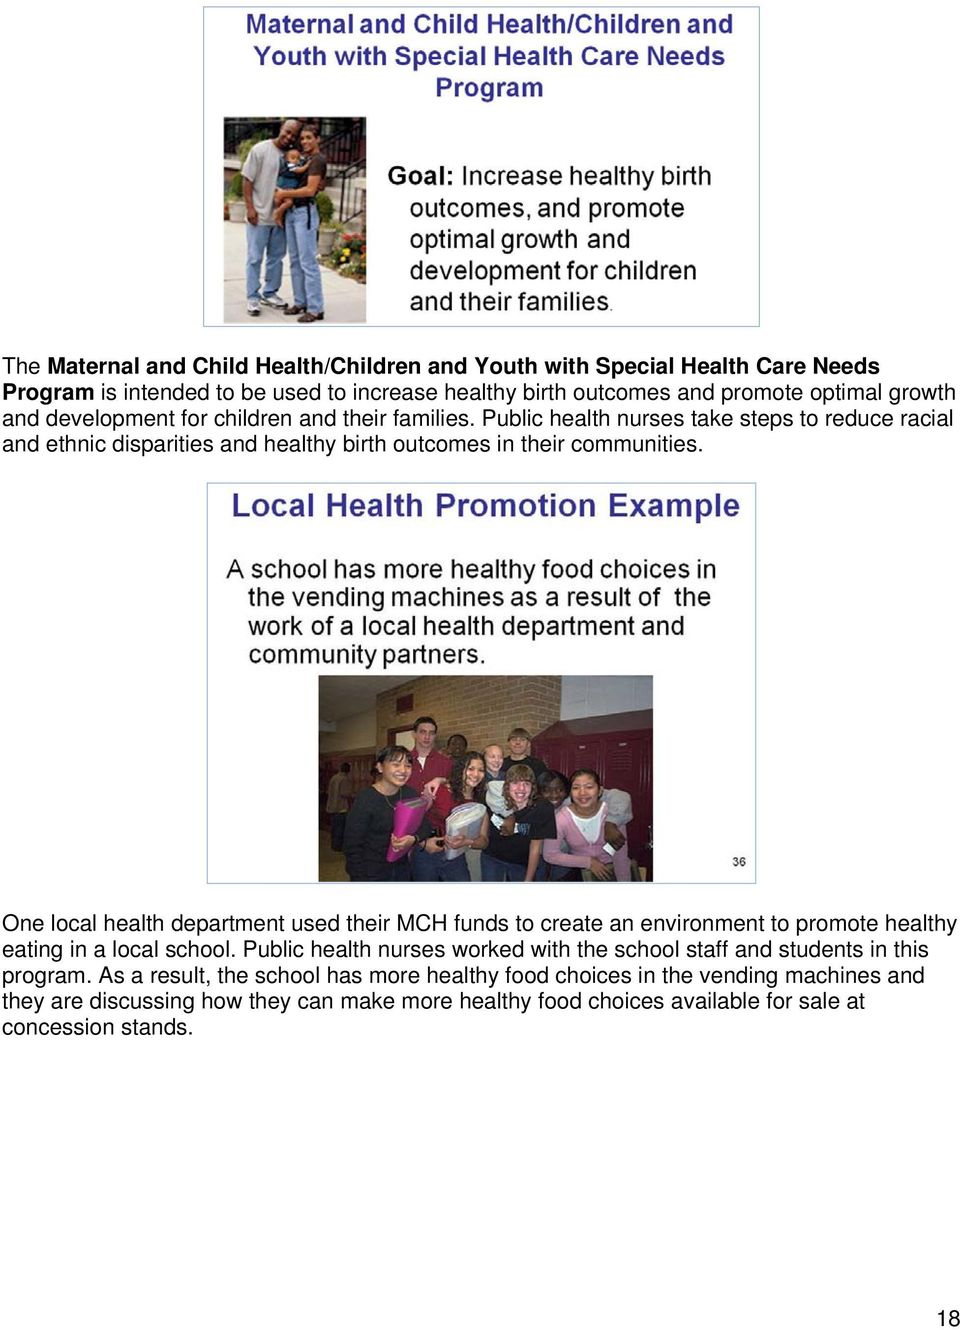 One local health department used their MCH funds to create an environment to promote healthy eating in a local school.